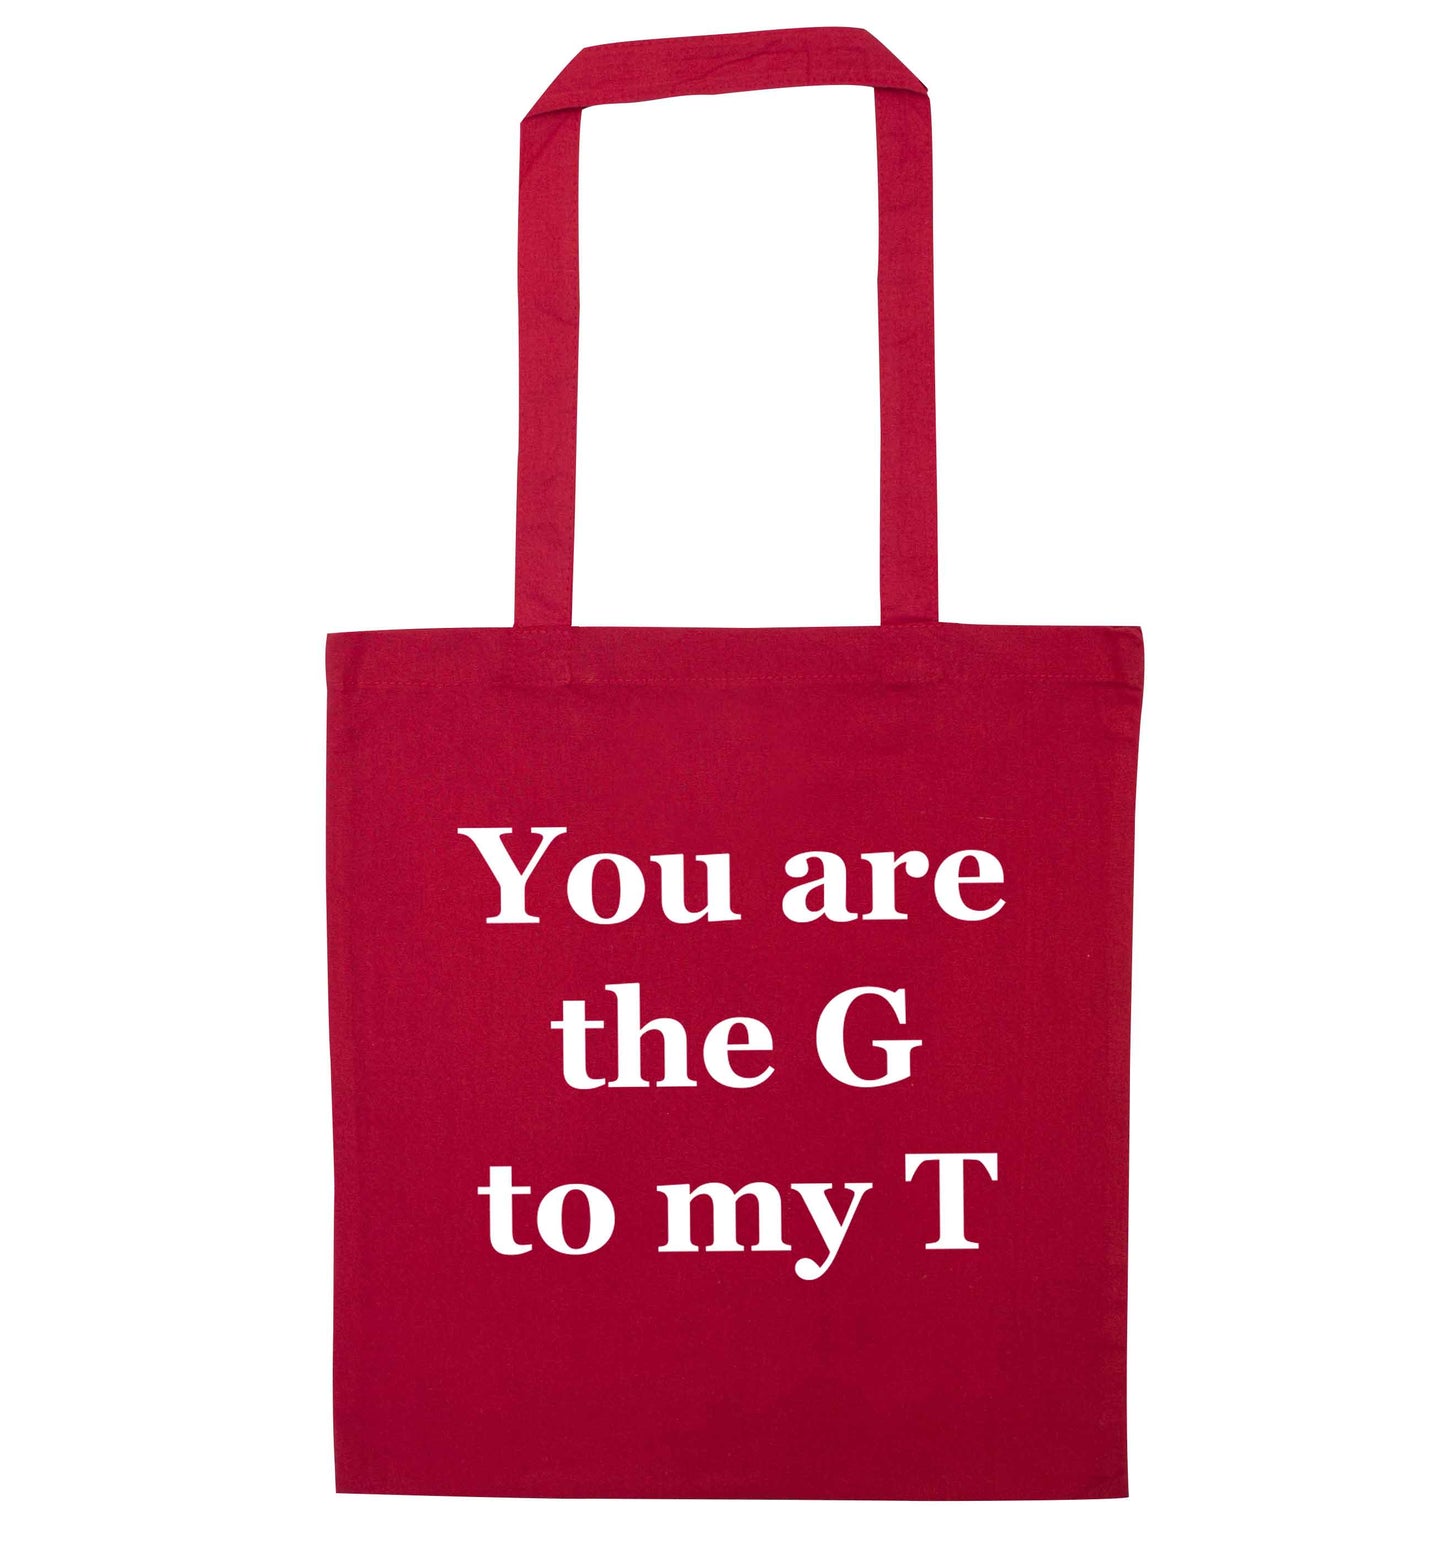 You are the G to my T red tote bag